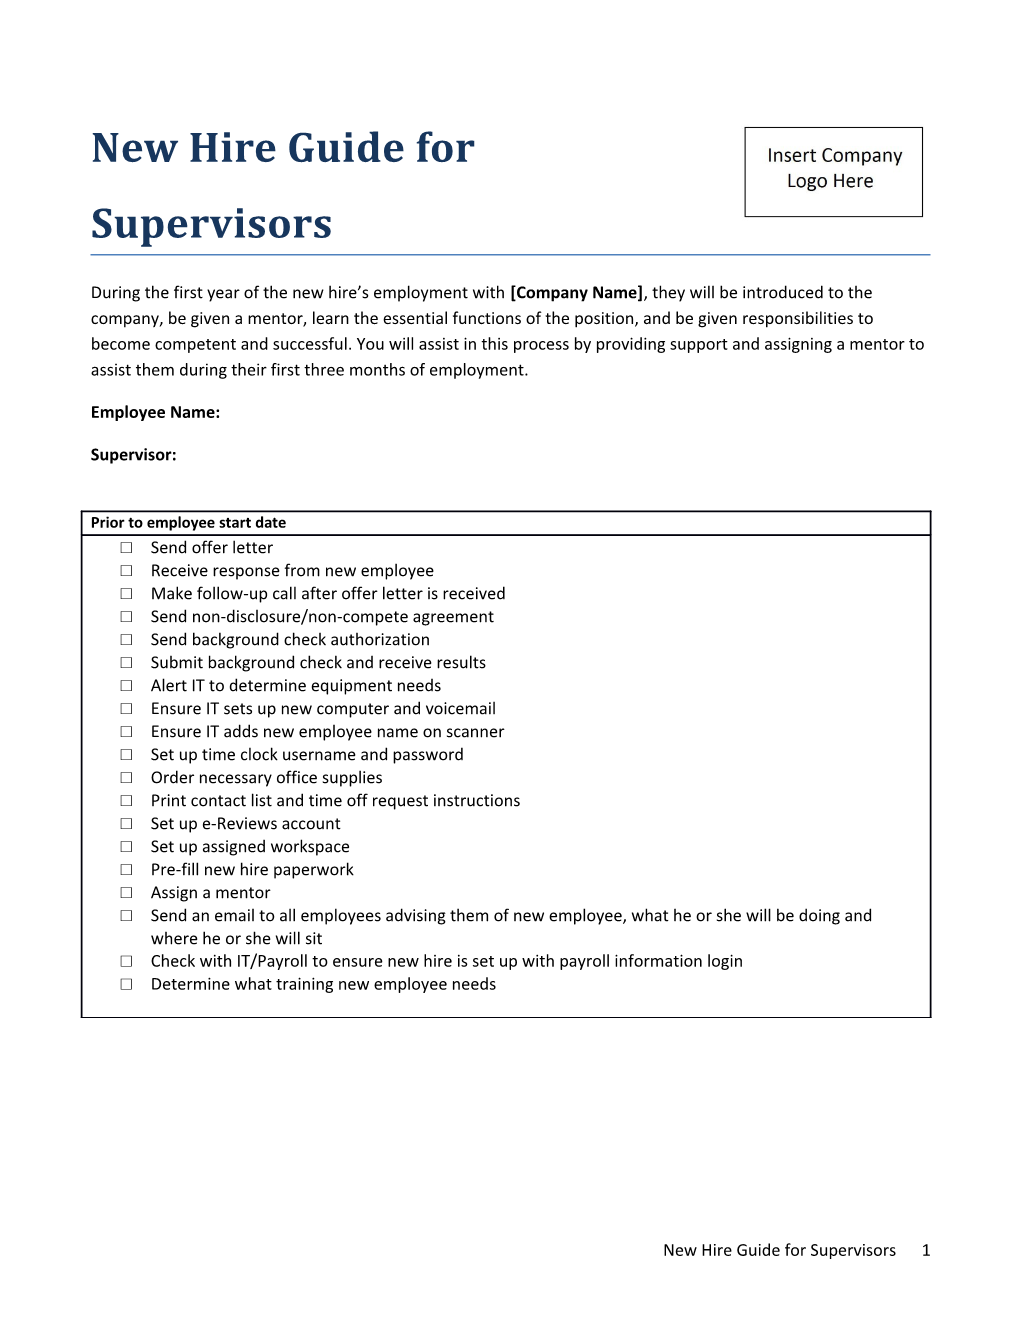 New Hire Guide for Supervisors 1